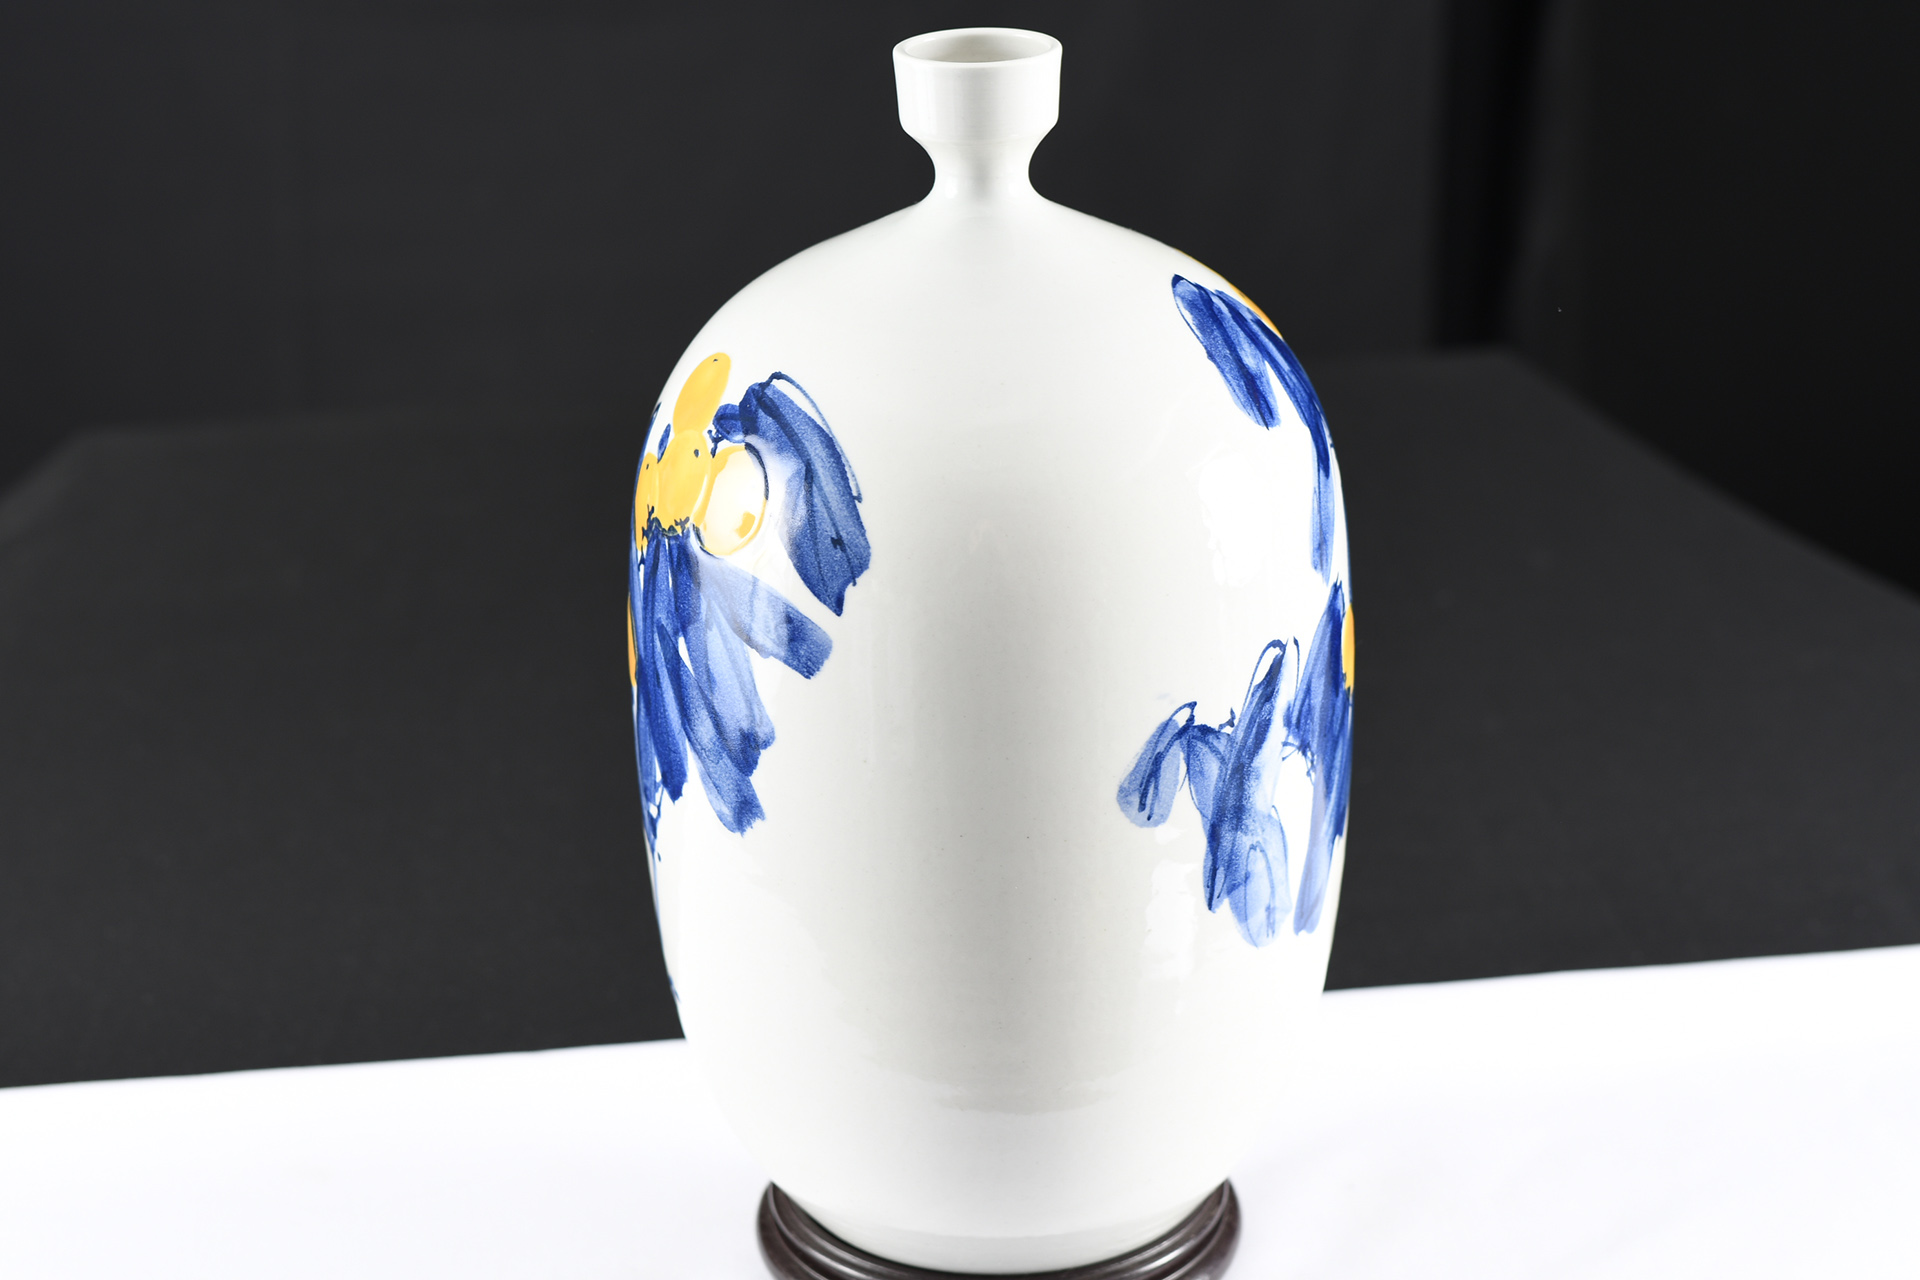 White Porcelain Vase with Hand Painted Yellow and Blue Floral Design